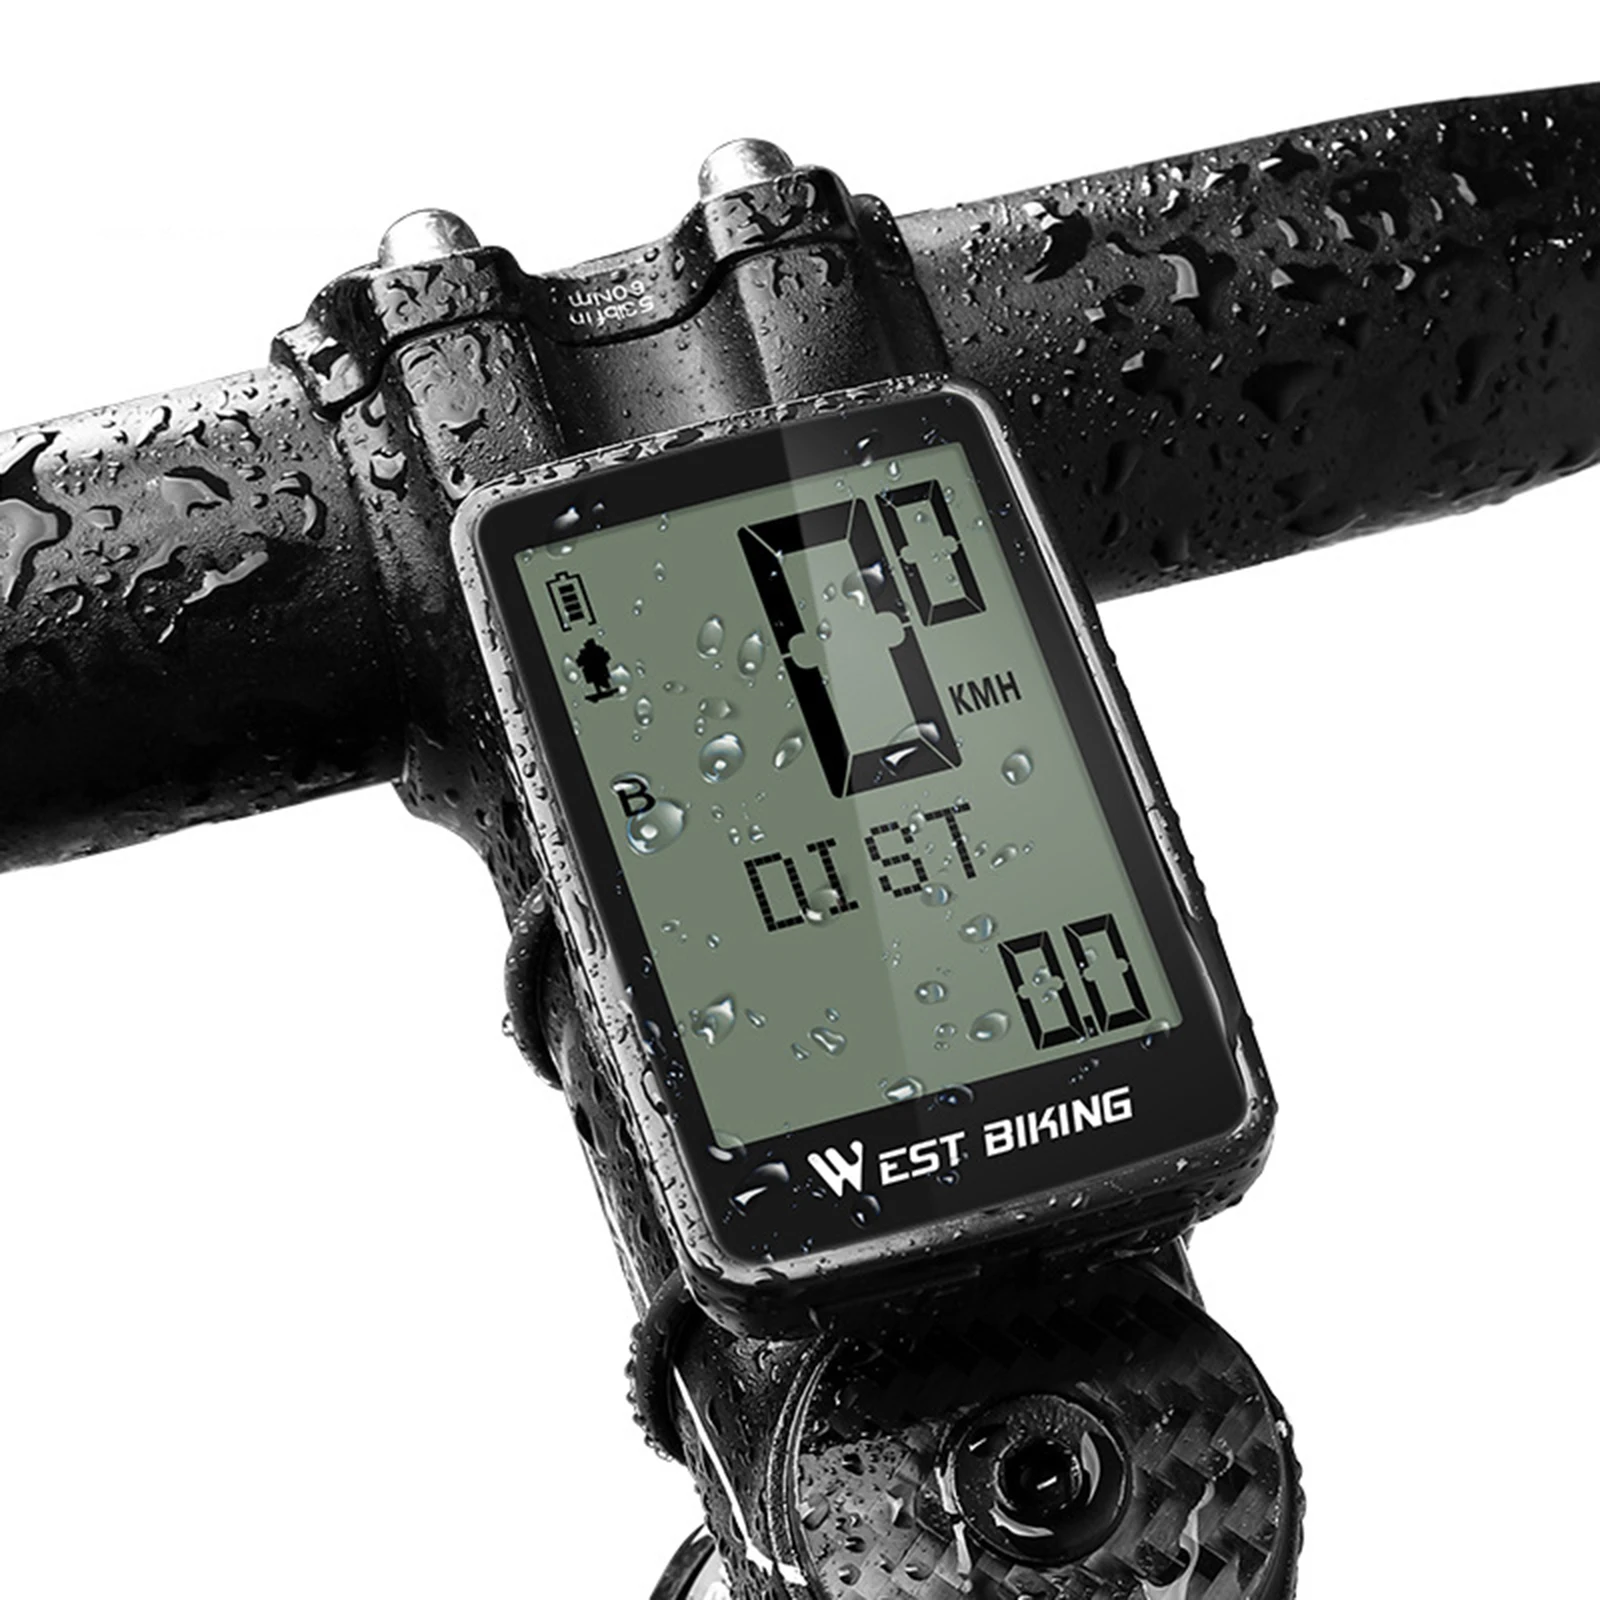 Bicycle Computer Wireless Support Five Languages Bike Computer Waterproof Speedometer Odometer Cycling Stopwatch with Display